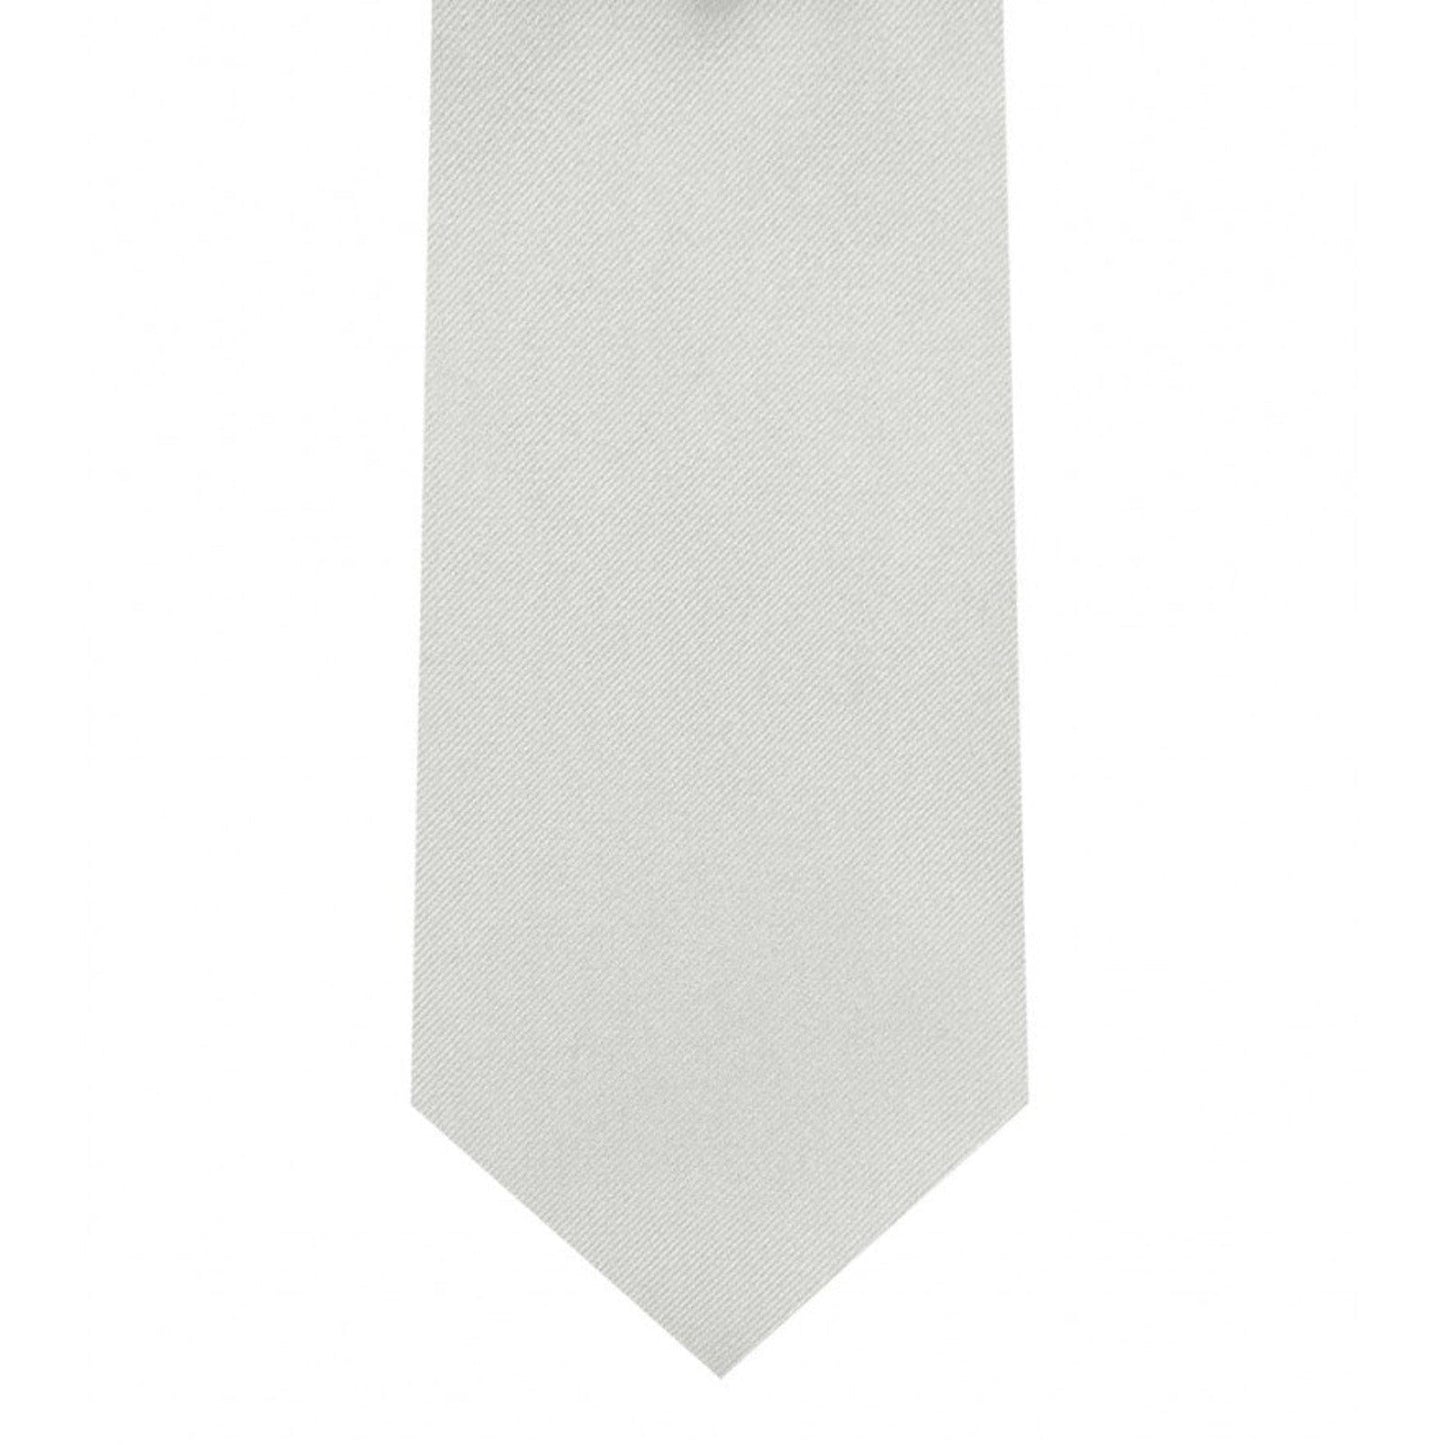 Classic Silver Tie Skinny width 2.75 inches With Matching Pocket Square | KCT Menswear 